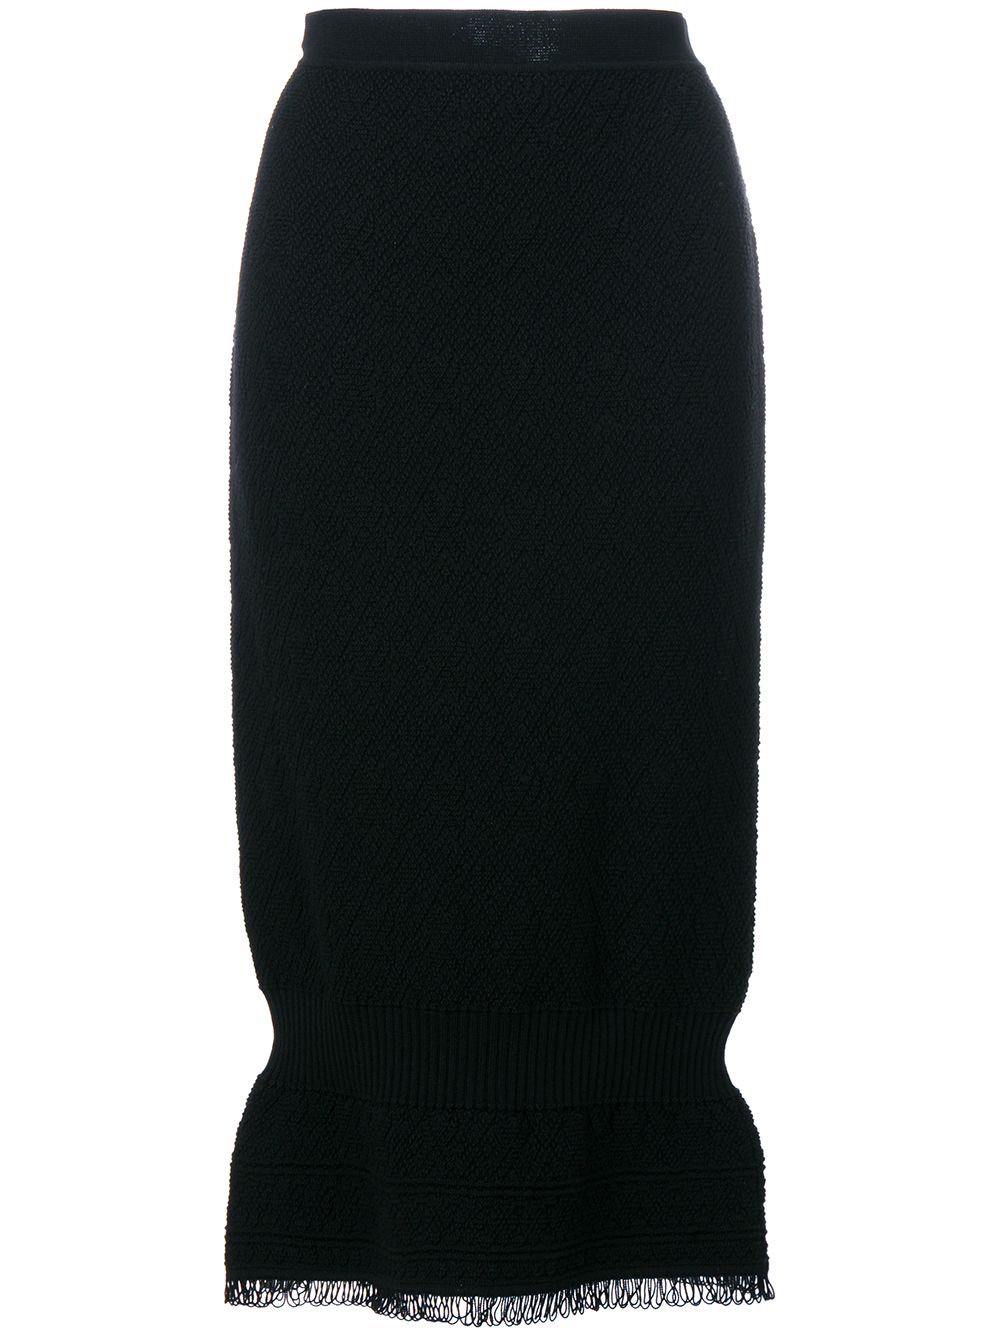 Image 1 of Christian Dior 2000s pre-owned fringed knitted skirt